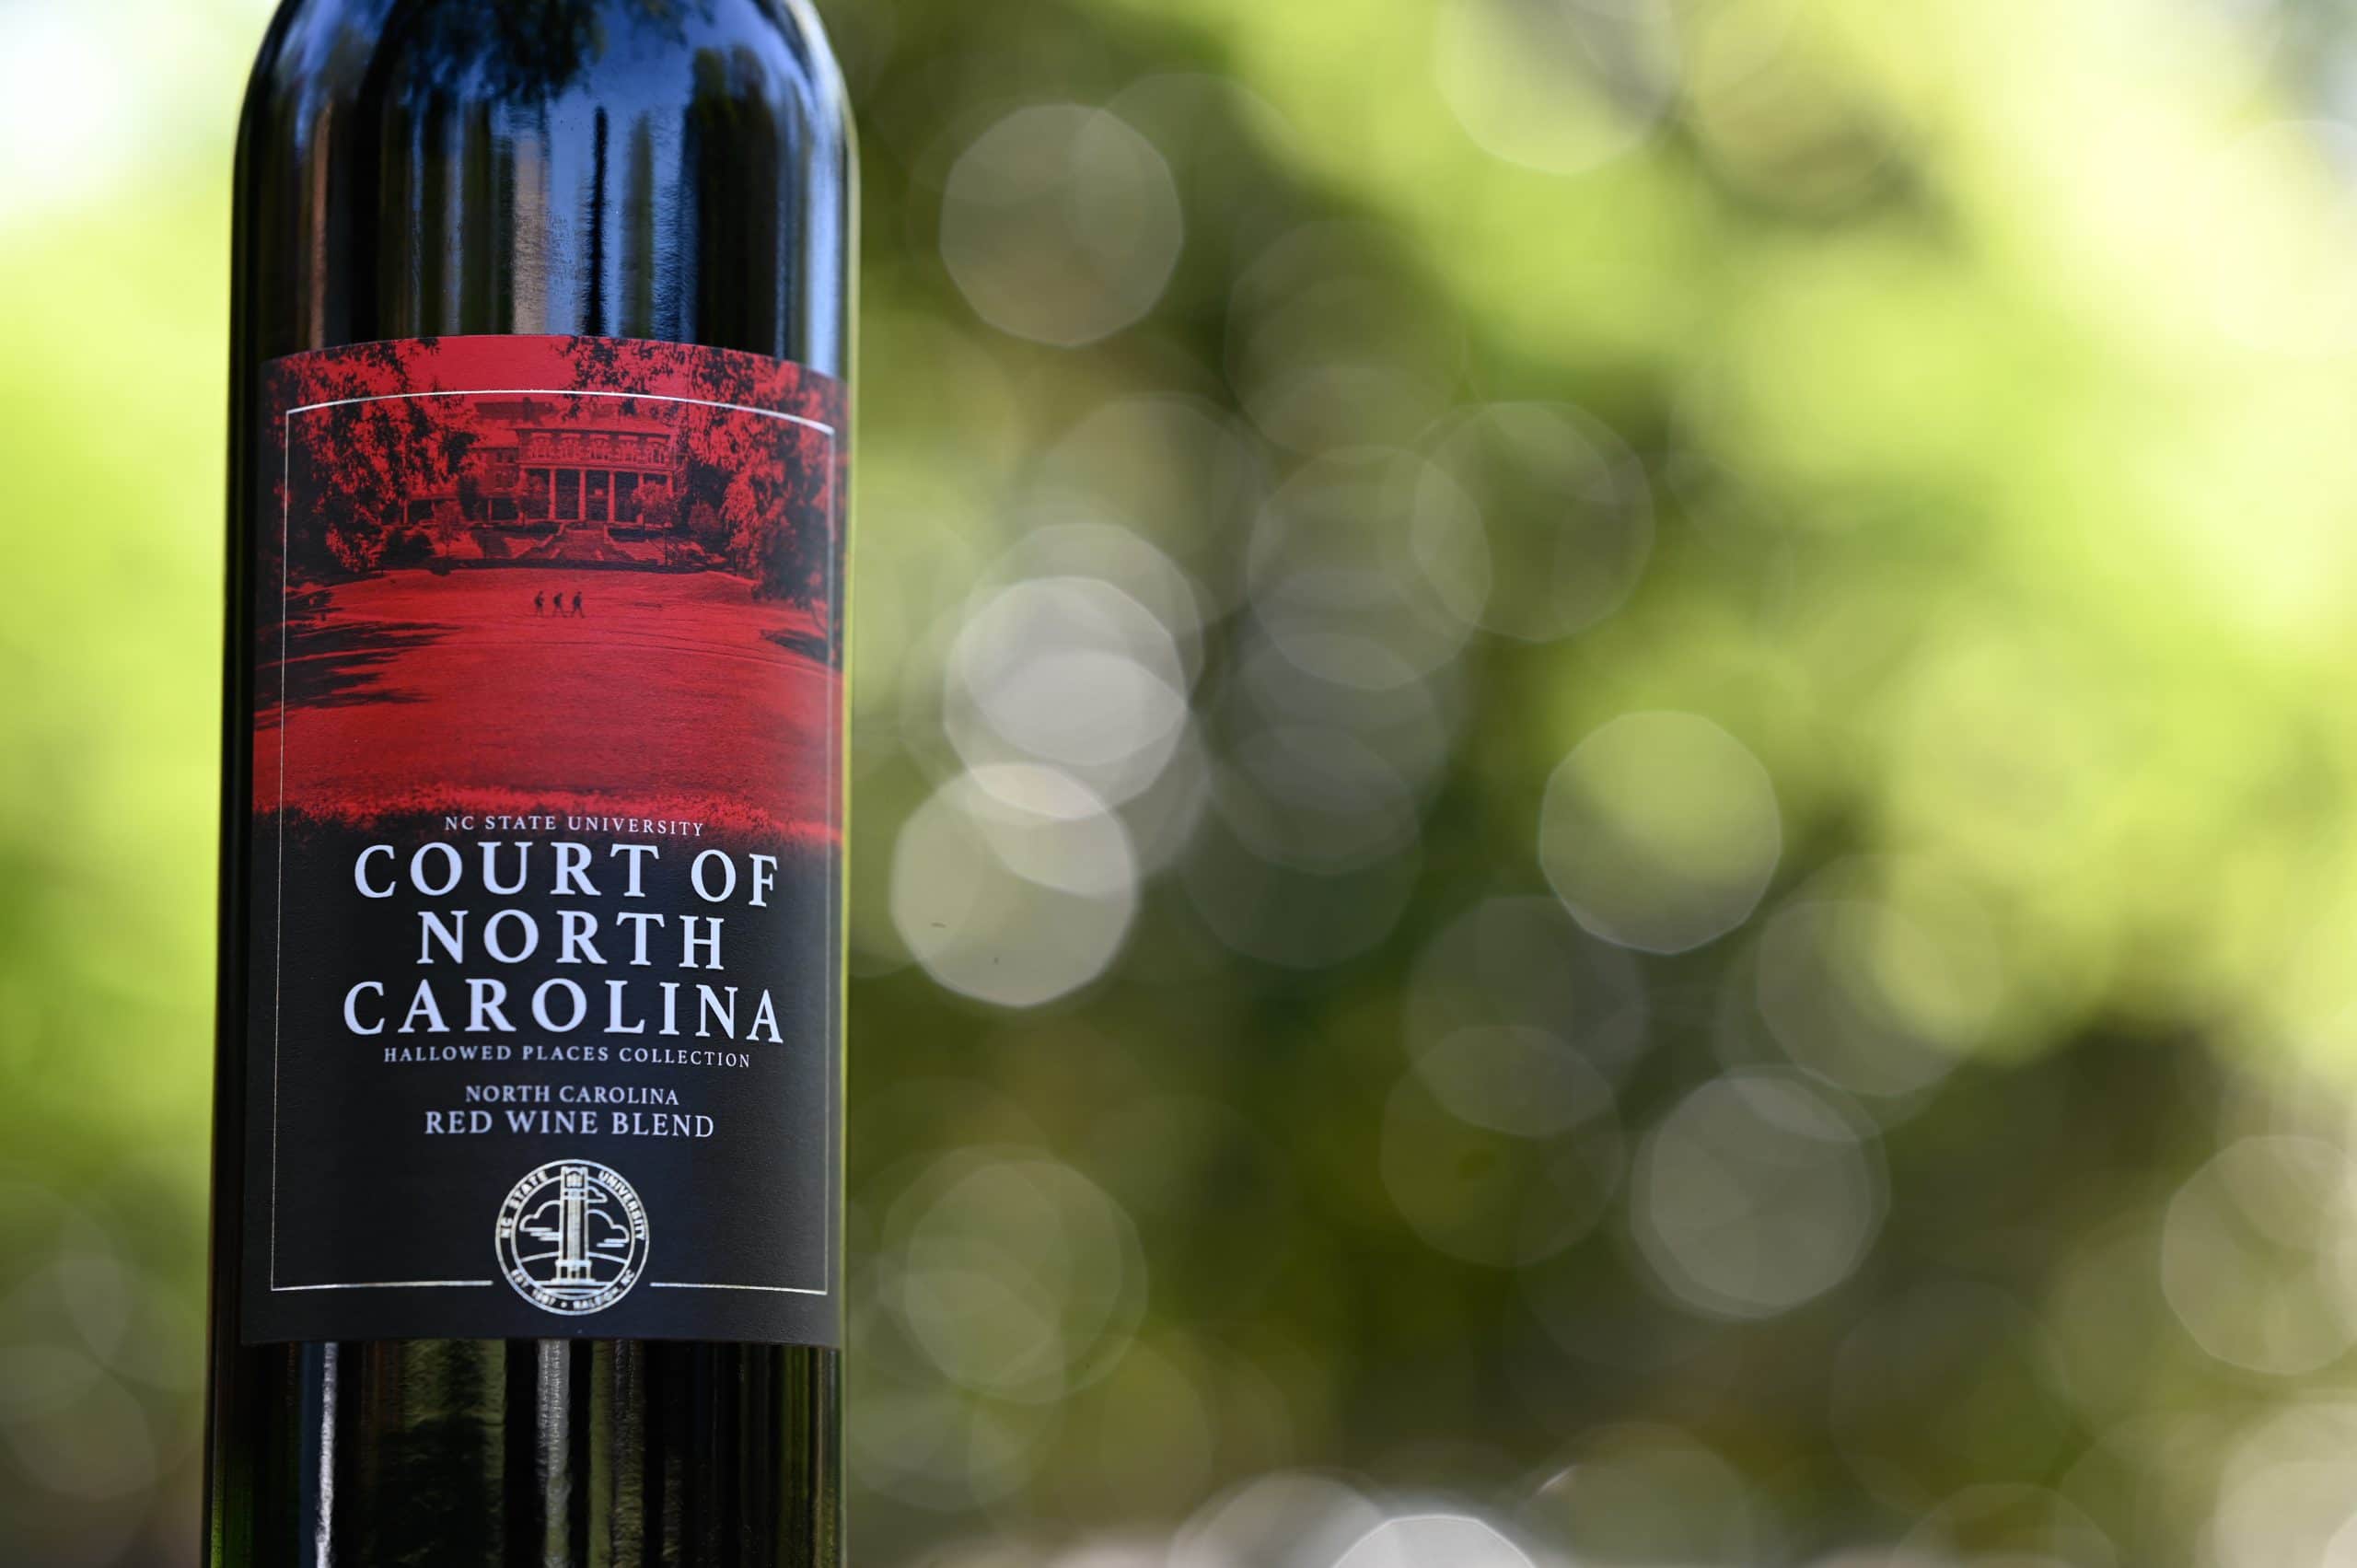 The newest wine in the university's Hallowed Places collection, featuring the Court of North Carolina.